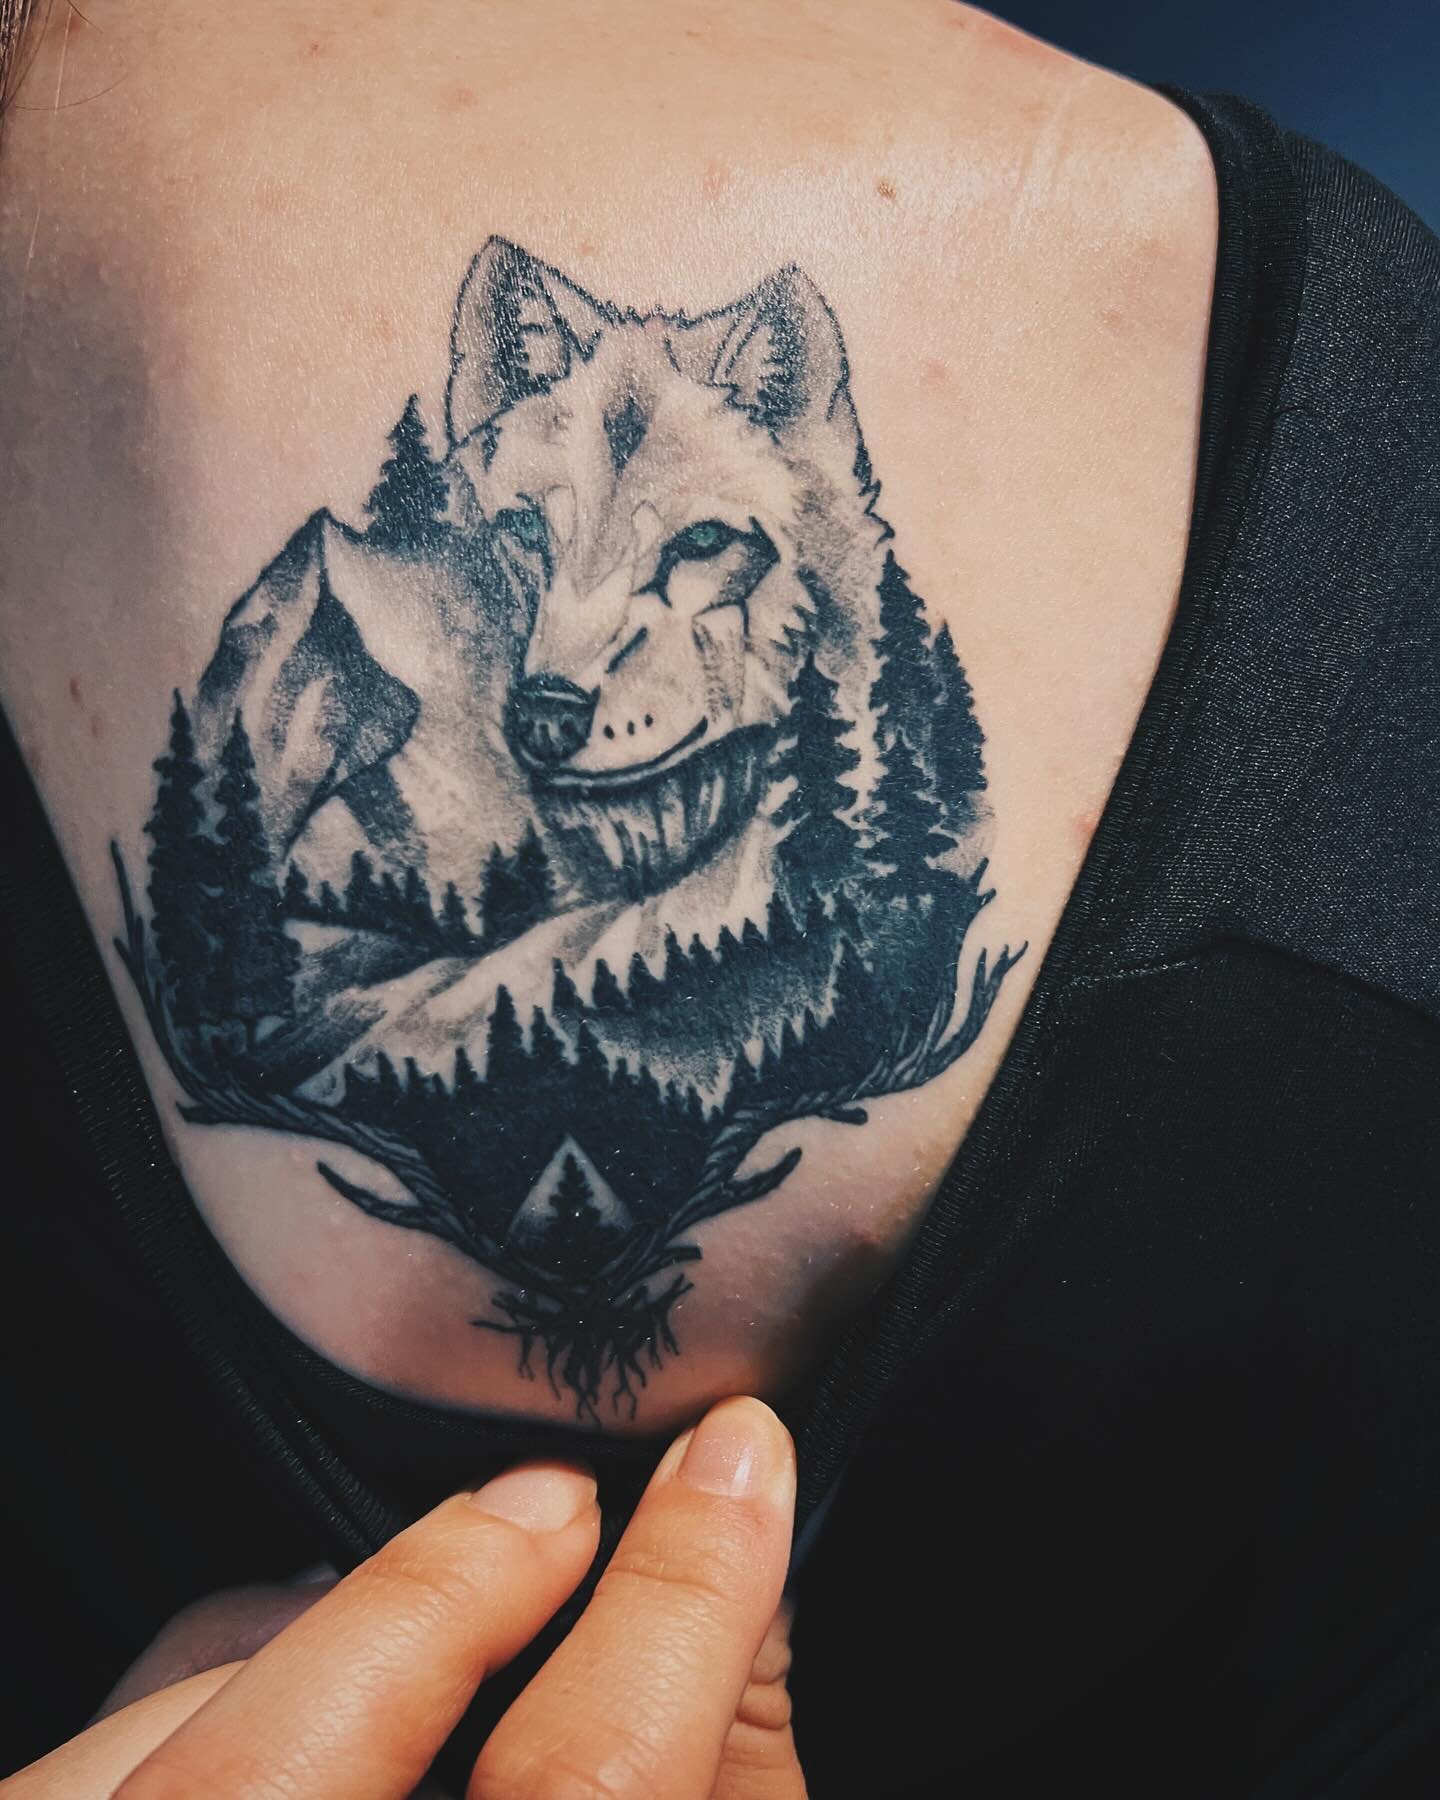 I also got to see this one healed a couple days ago. It&rsquo;s pretty cool seeing the gray wash all healed and how it&rsquo;s softened and lightened and contrasts with the solid black. 🖤🐺⛰️
.
#learning #growing #ilovelearning #tattooapprentice #he